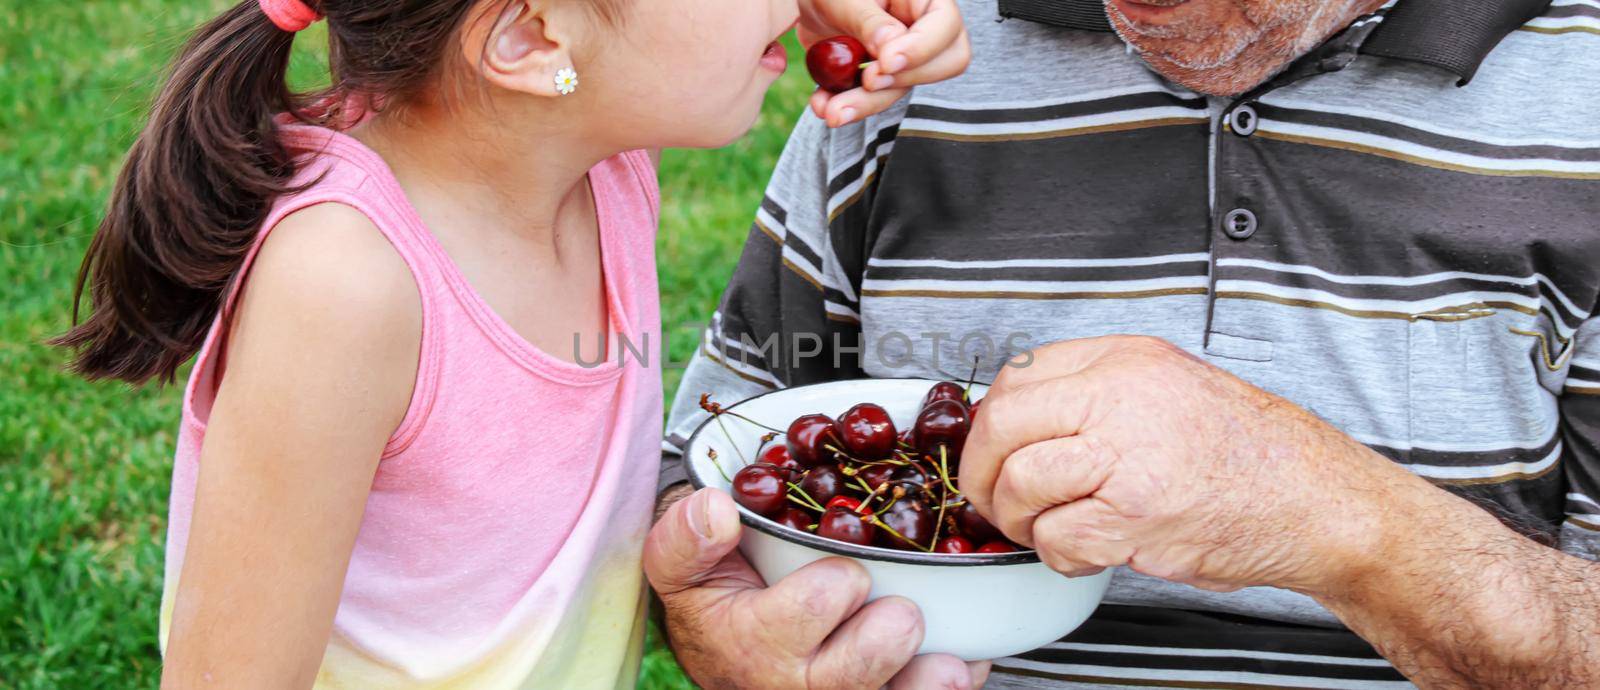 grandparents feed the child with cherries.selective focus. by mila1784